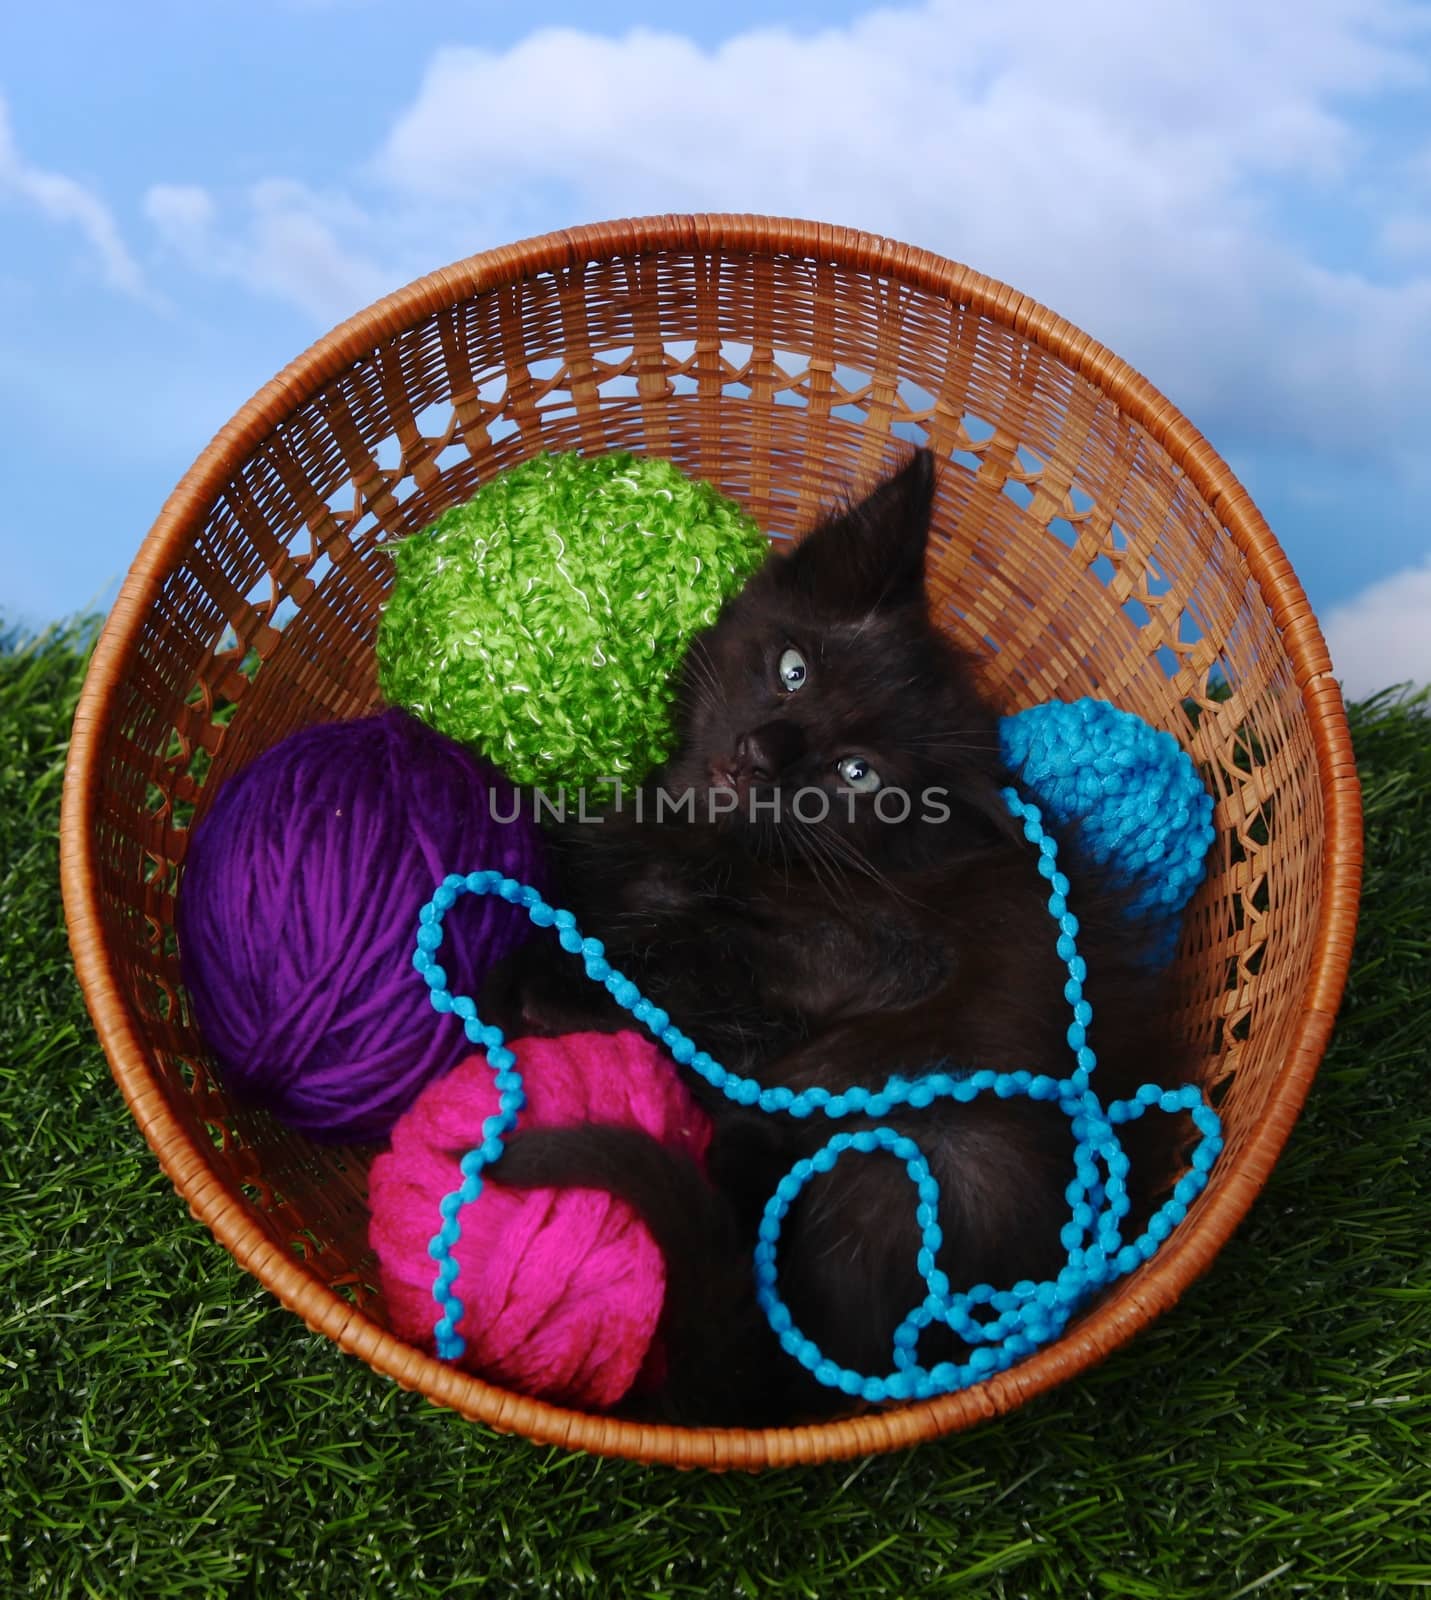 Adorable Kitten in a Case Filled with Yarn 